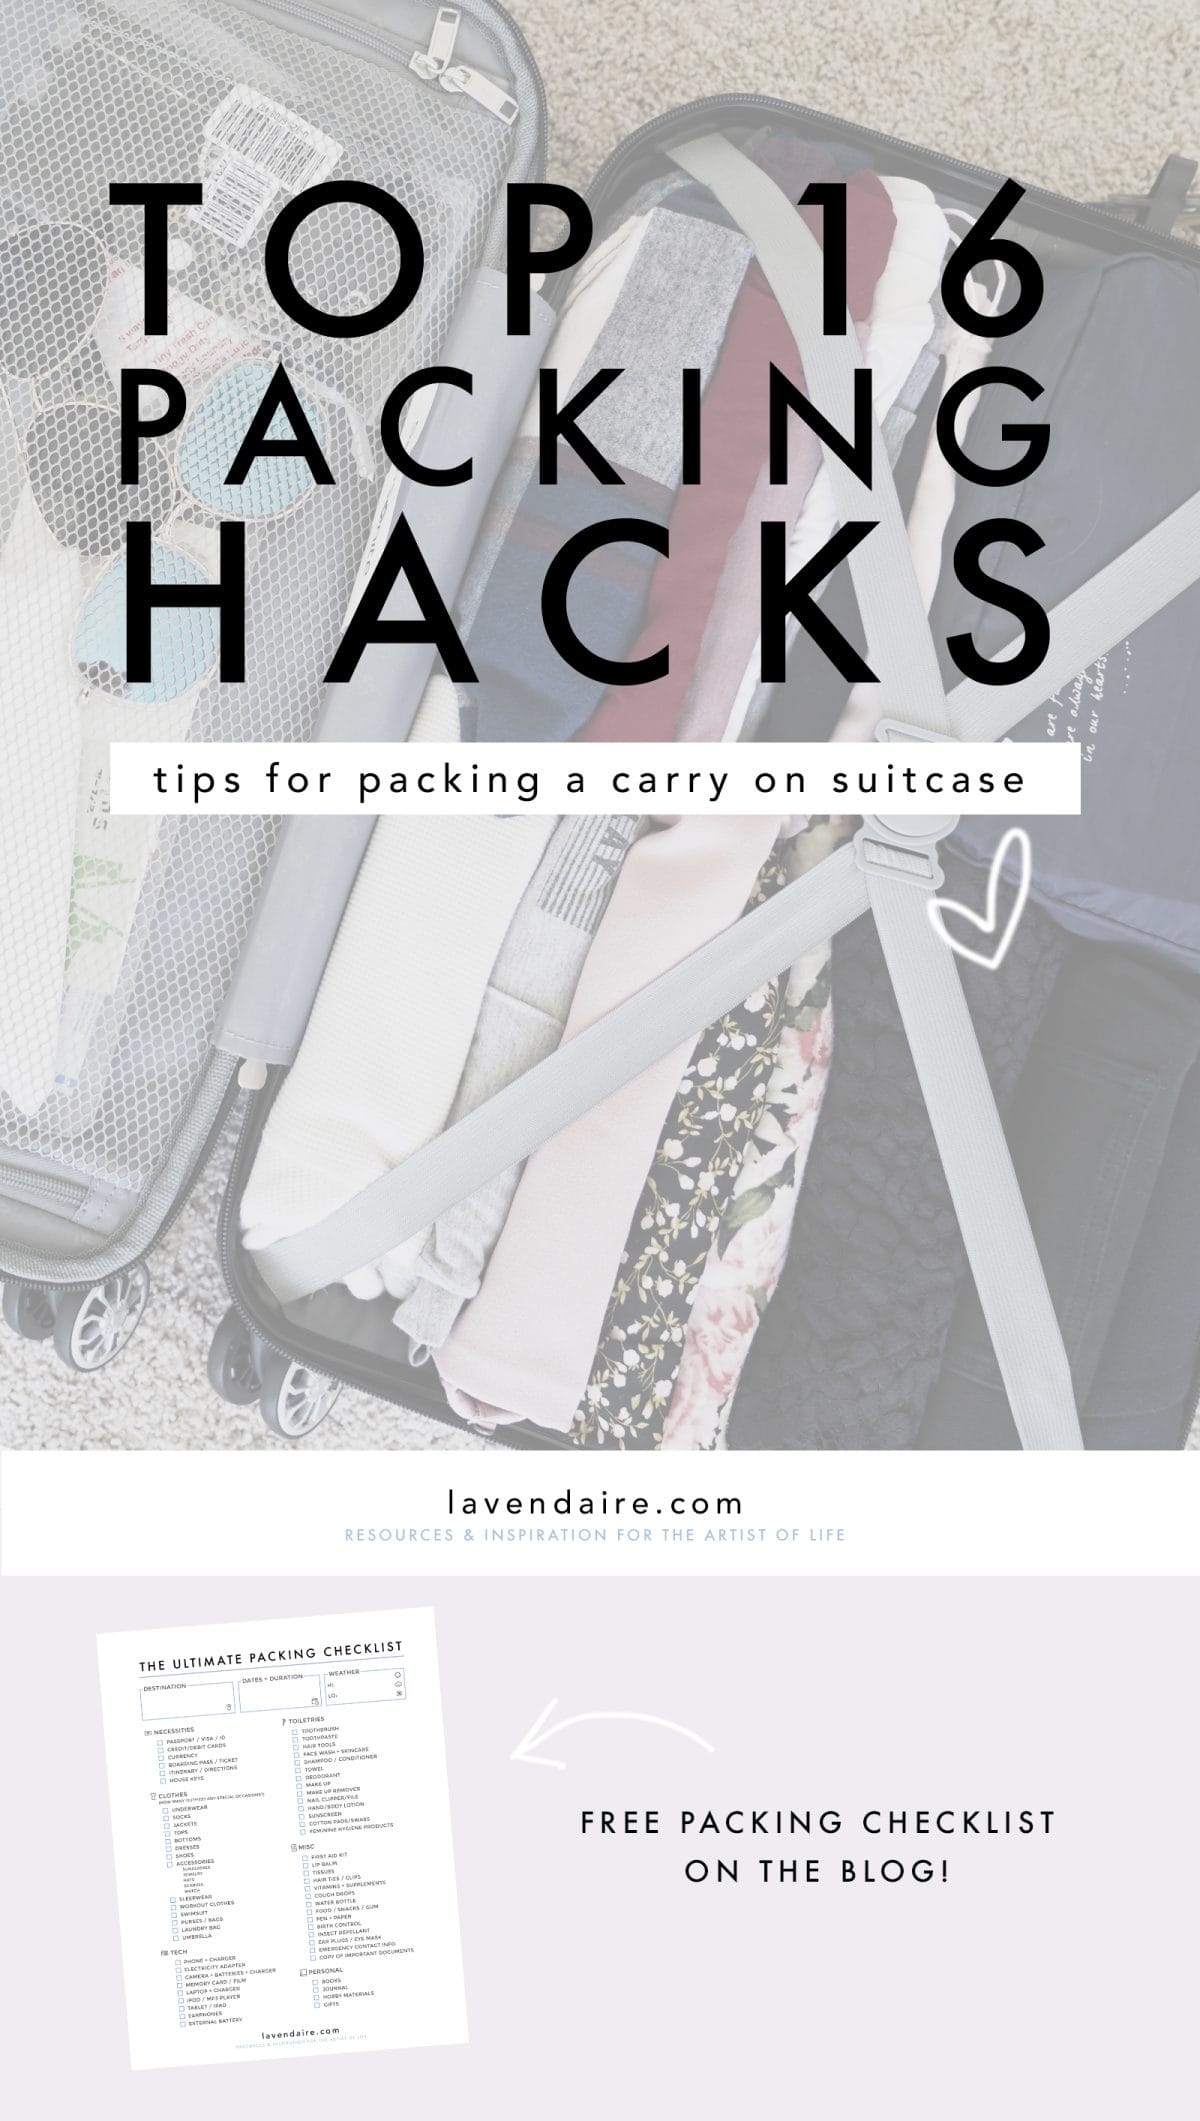 top packing hacks, packing tips, packing ideas, tips for packing a carry on, tips for packing light, how to pack light, packing only a carry on, vacation, travel